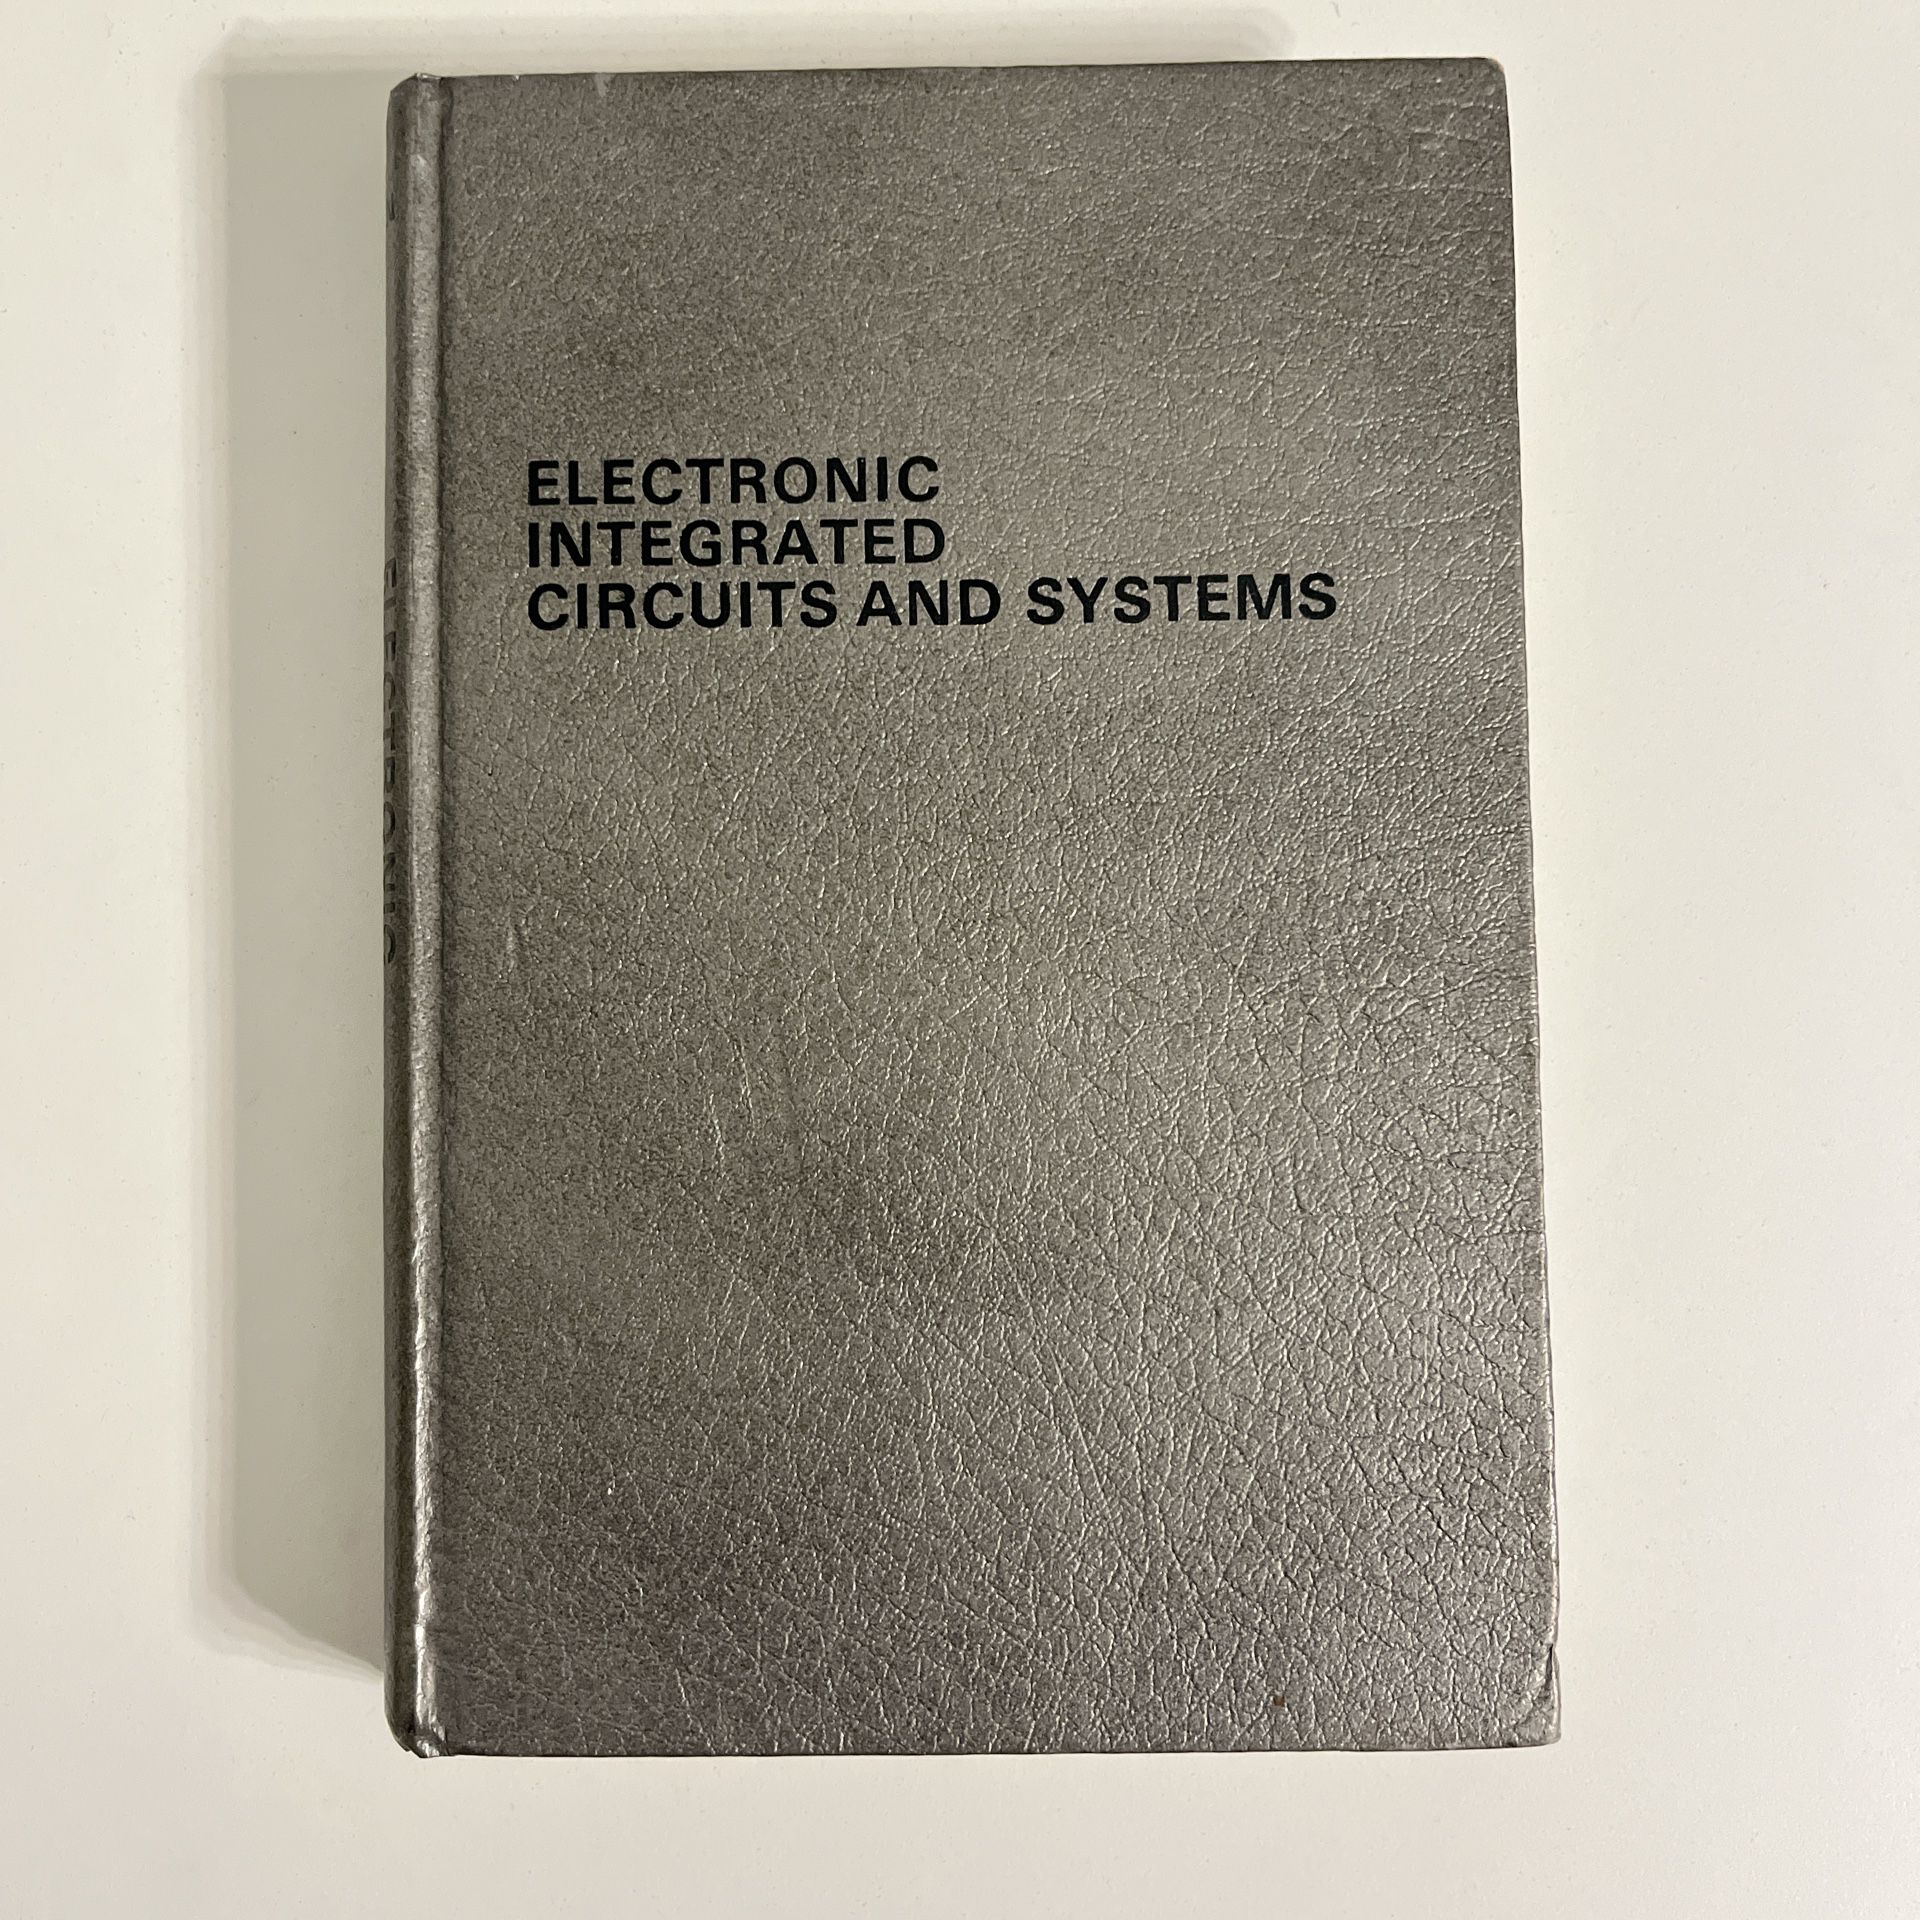 ELECTRONIC INTEGRATEDCIRCUITS AND SYSTEMS By Franklin C. Fitchen